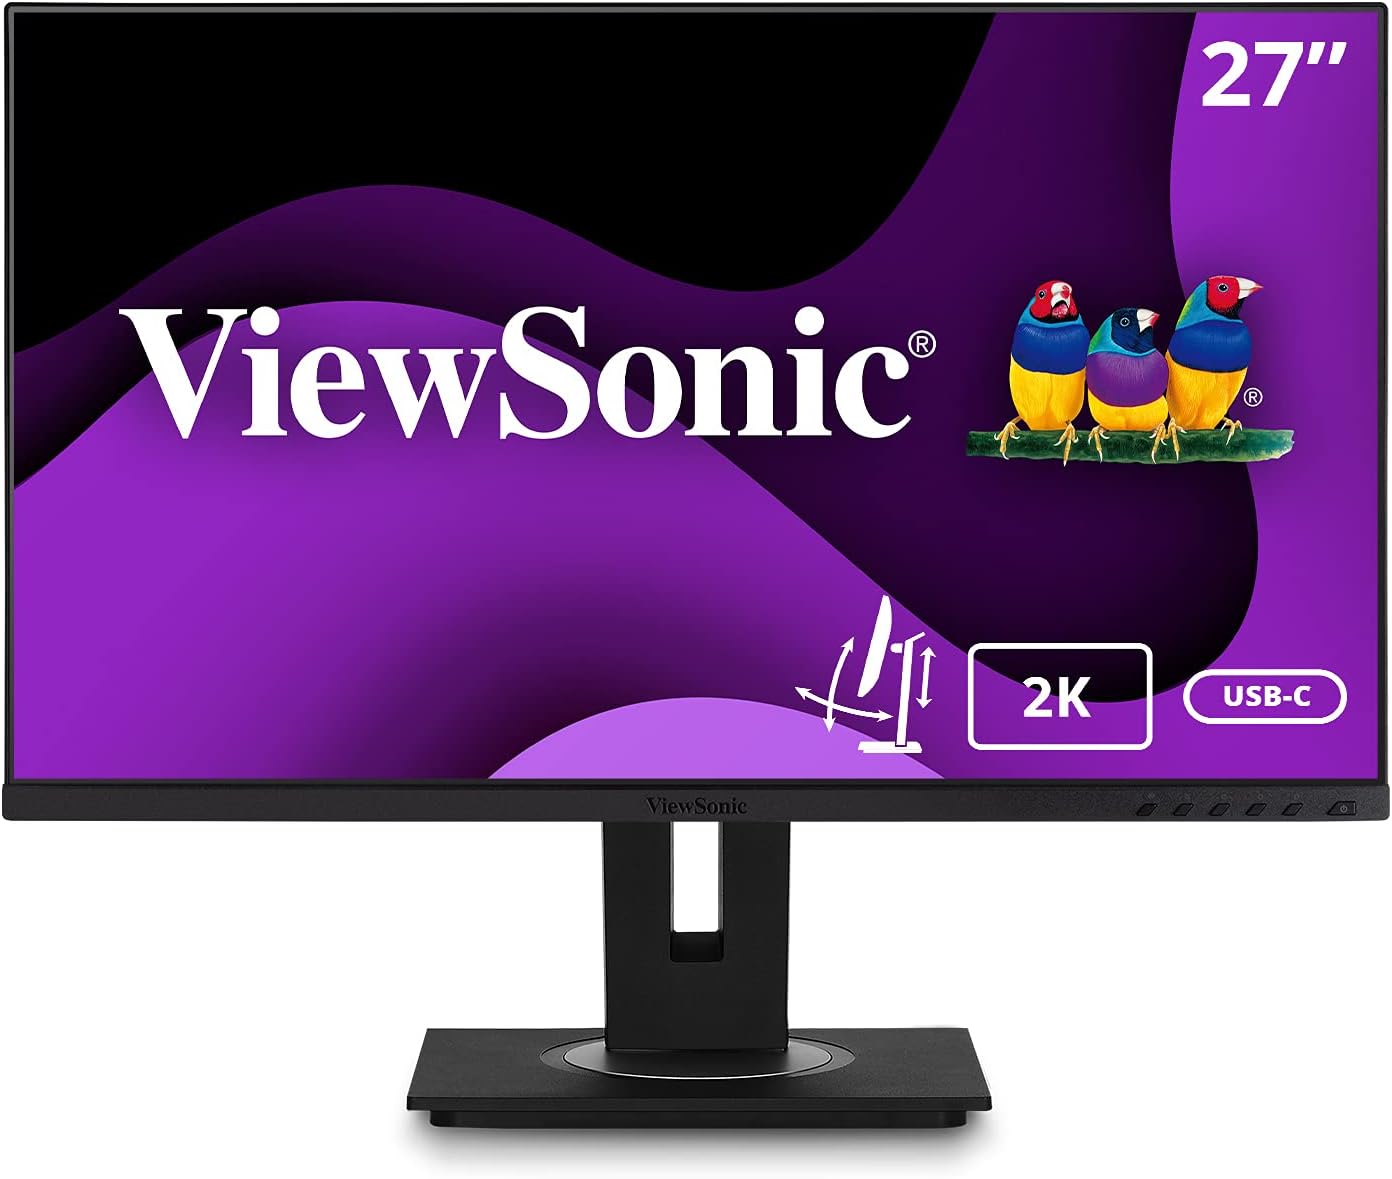 ViewSonic VG2755-2K 27" IPS WQHD Ergonomic Monitor with USB Type-C | 4x USB | HDMI | DisplayPort | Eye Care for Work and Study at Home, Black